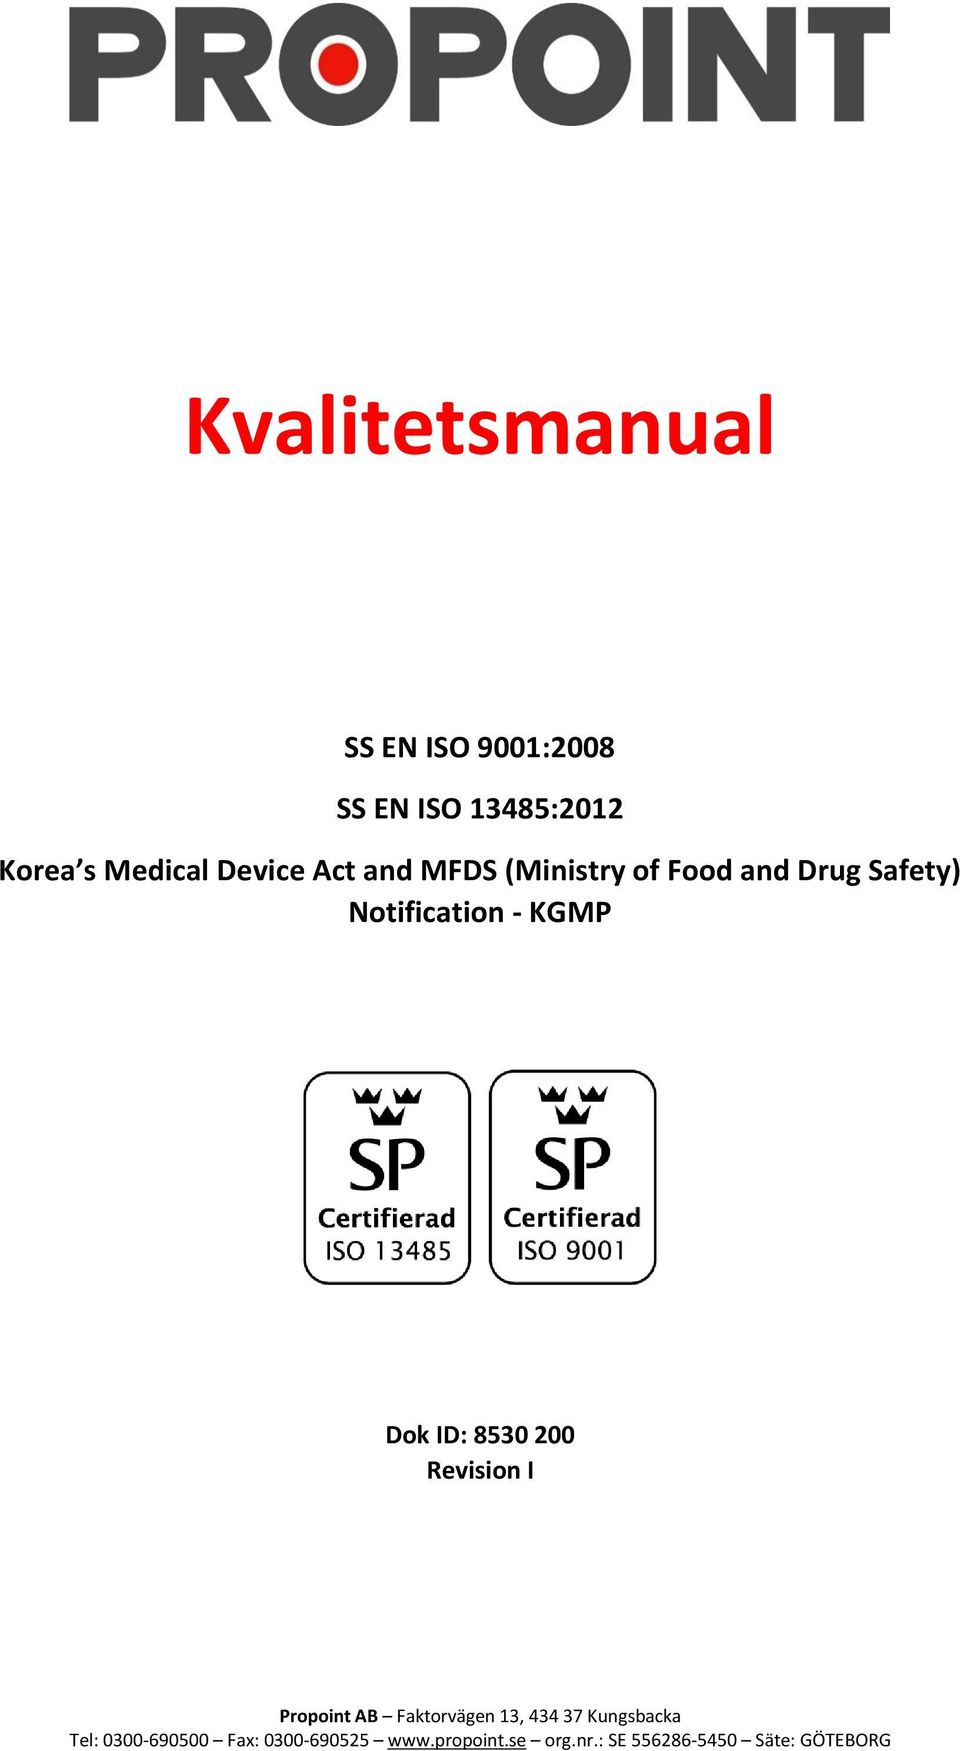 and MFDS (Ministry of Food and Drug Safety)